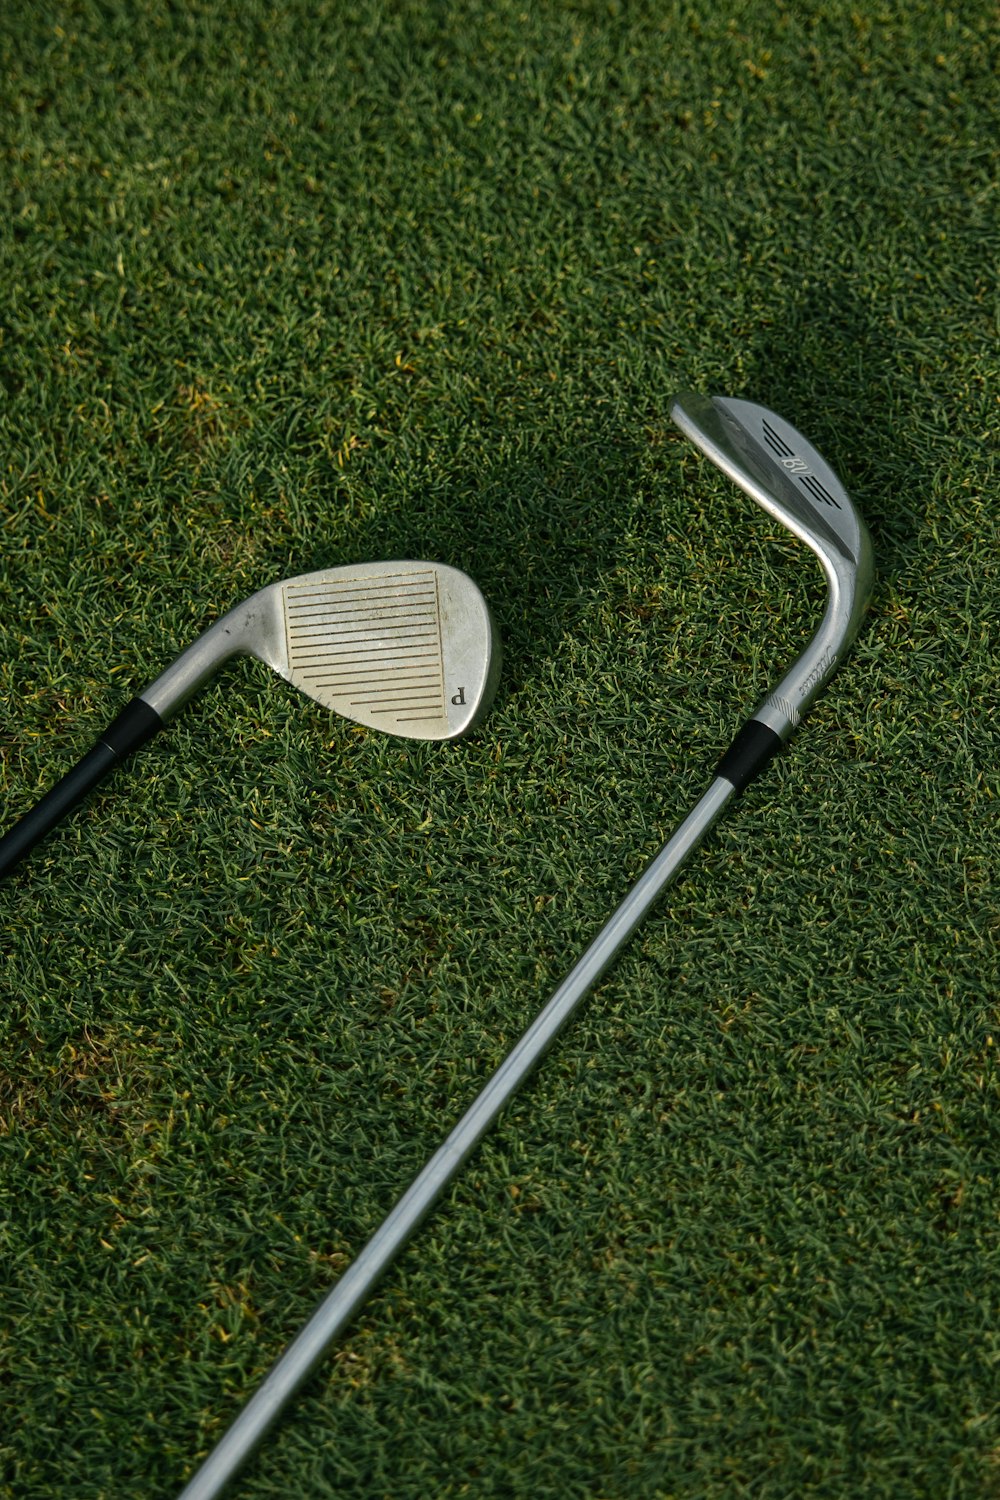 white and black golf club on green grass